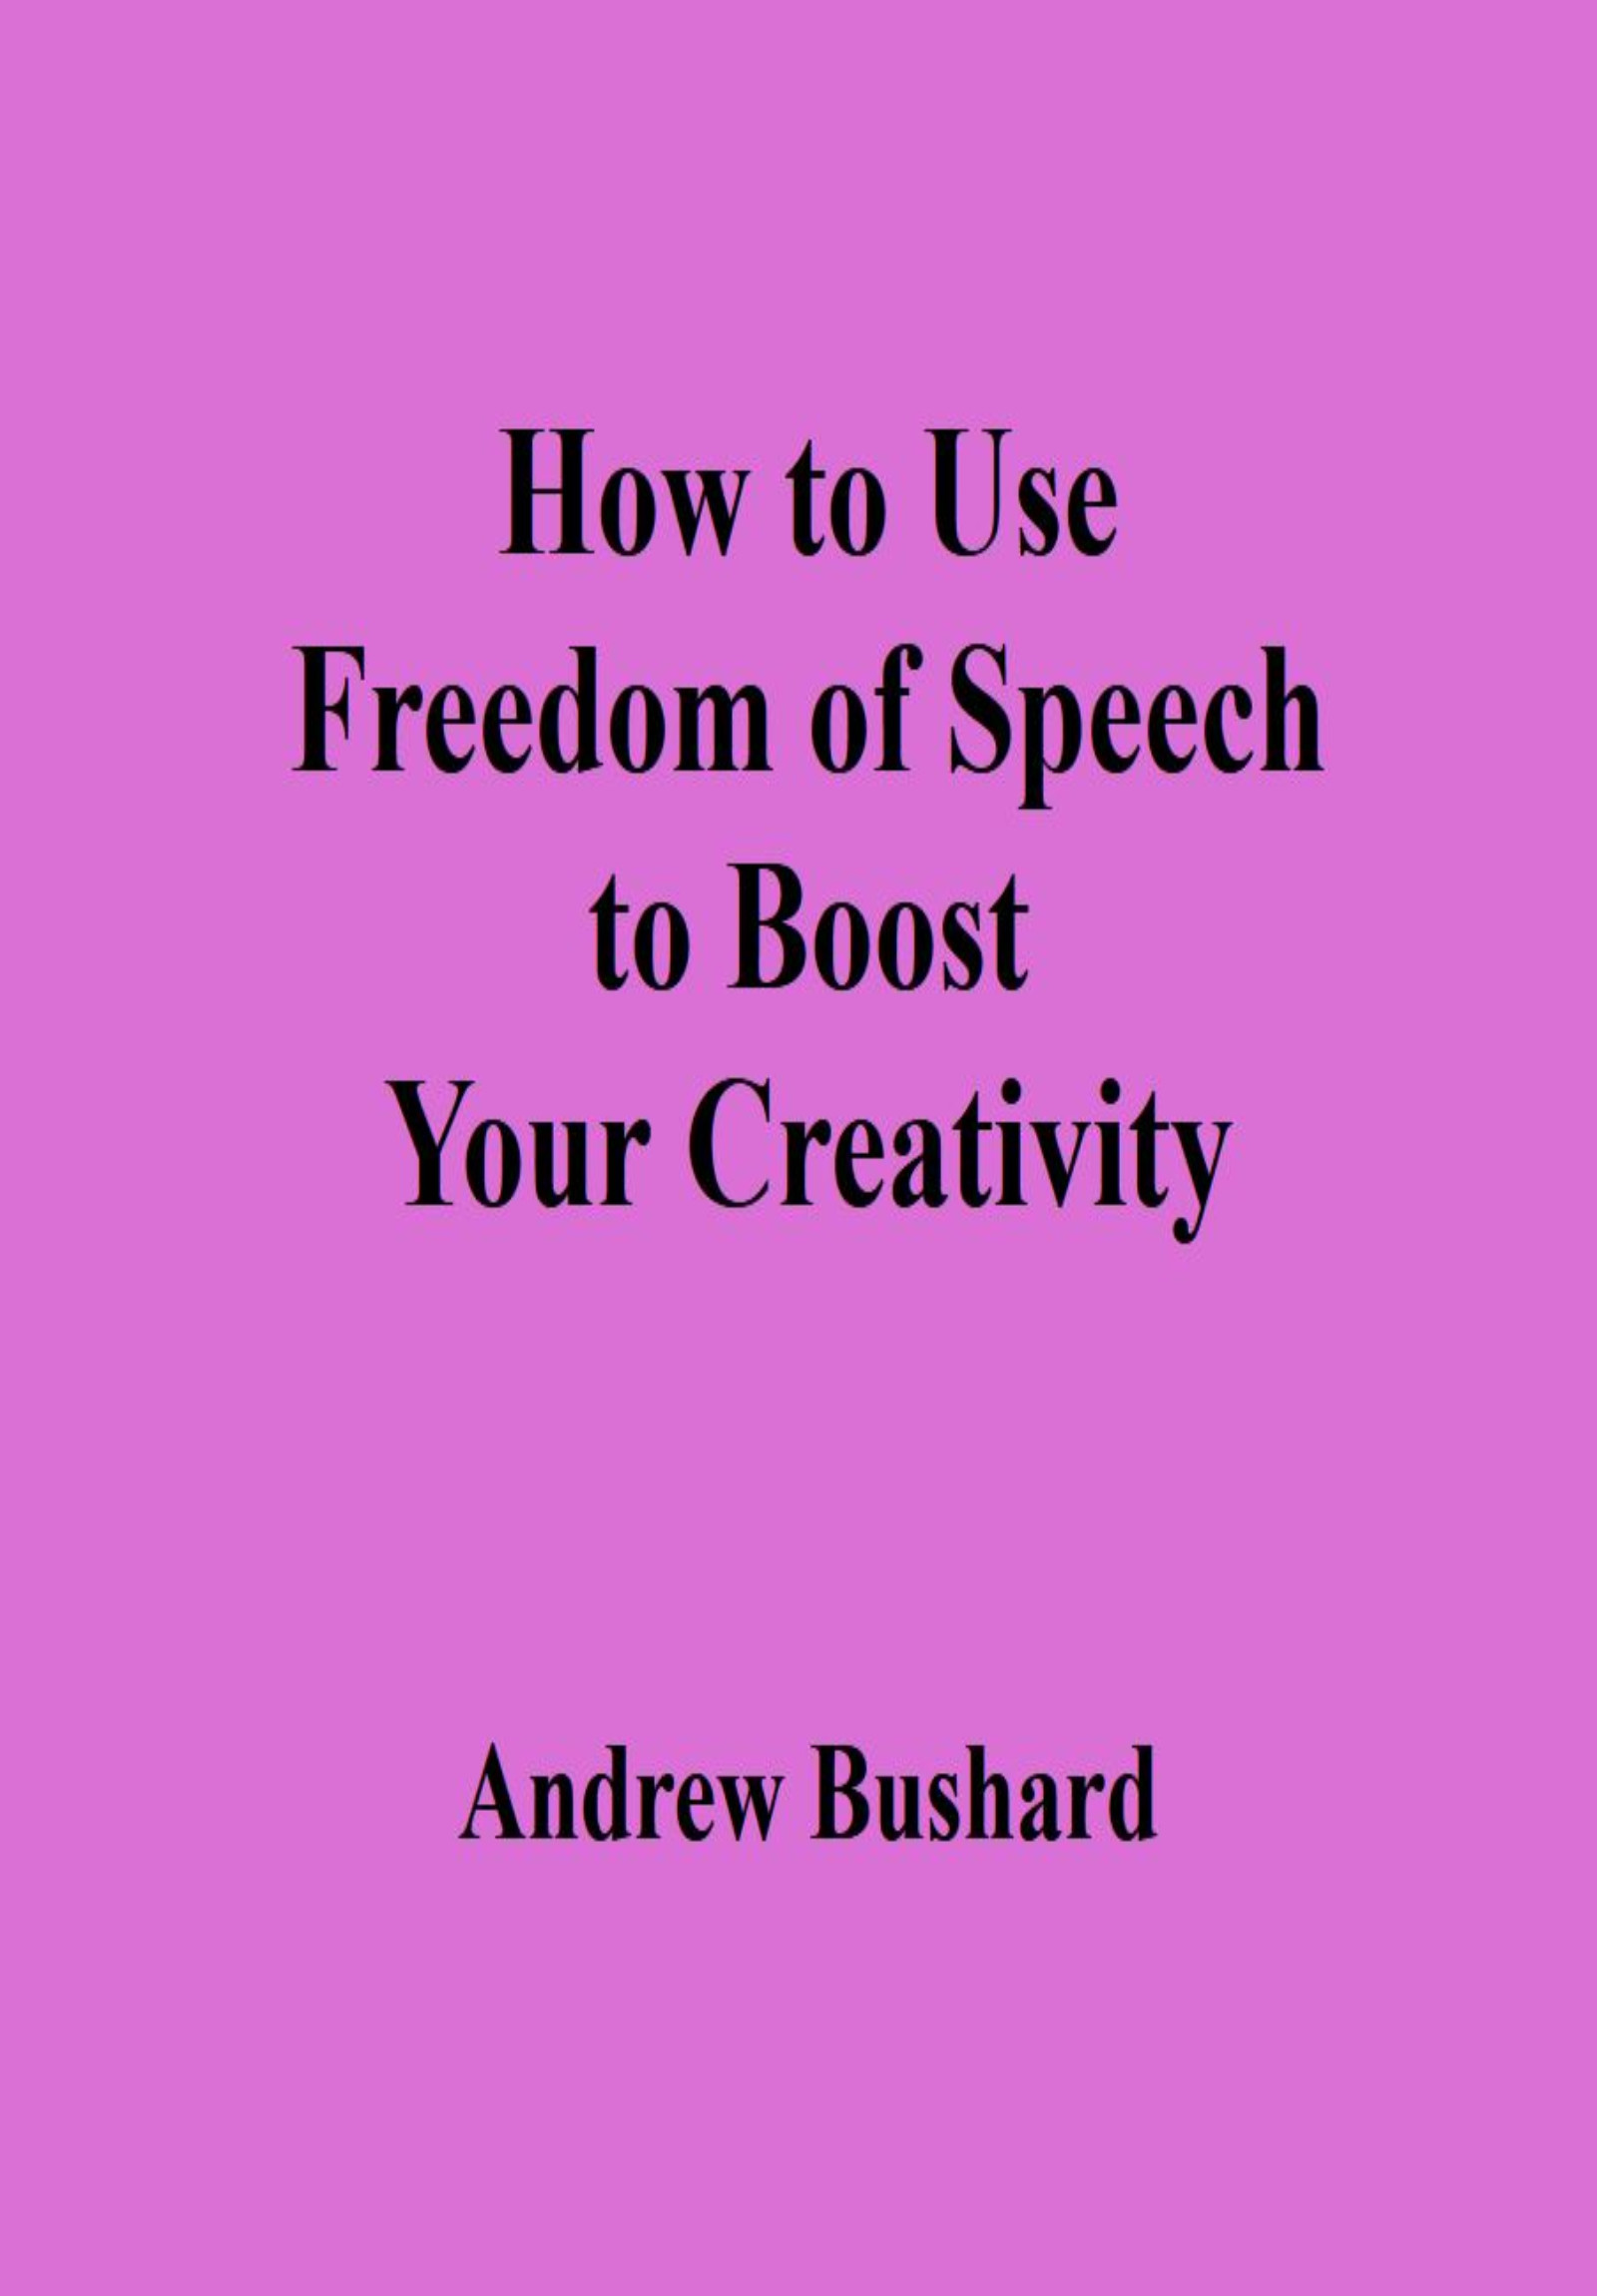 How to Use Freedom of Speech to Boost Your Creativity's featured image